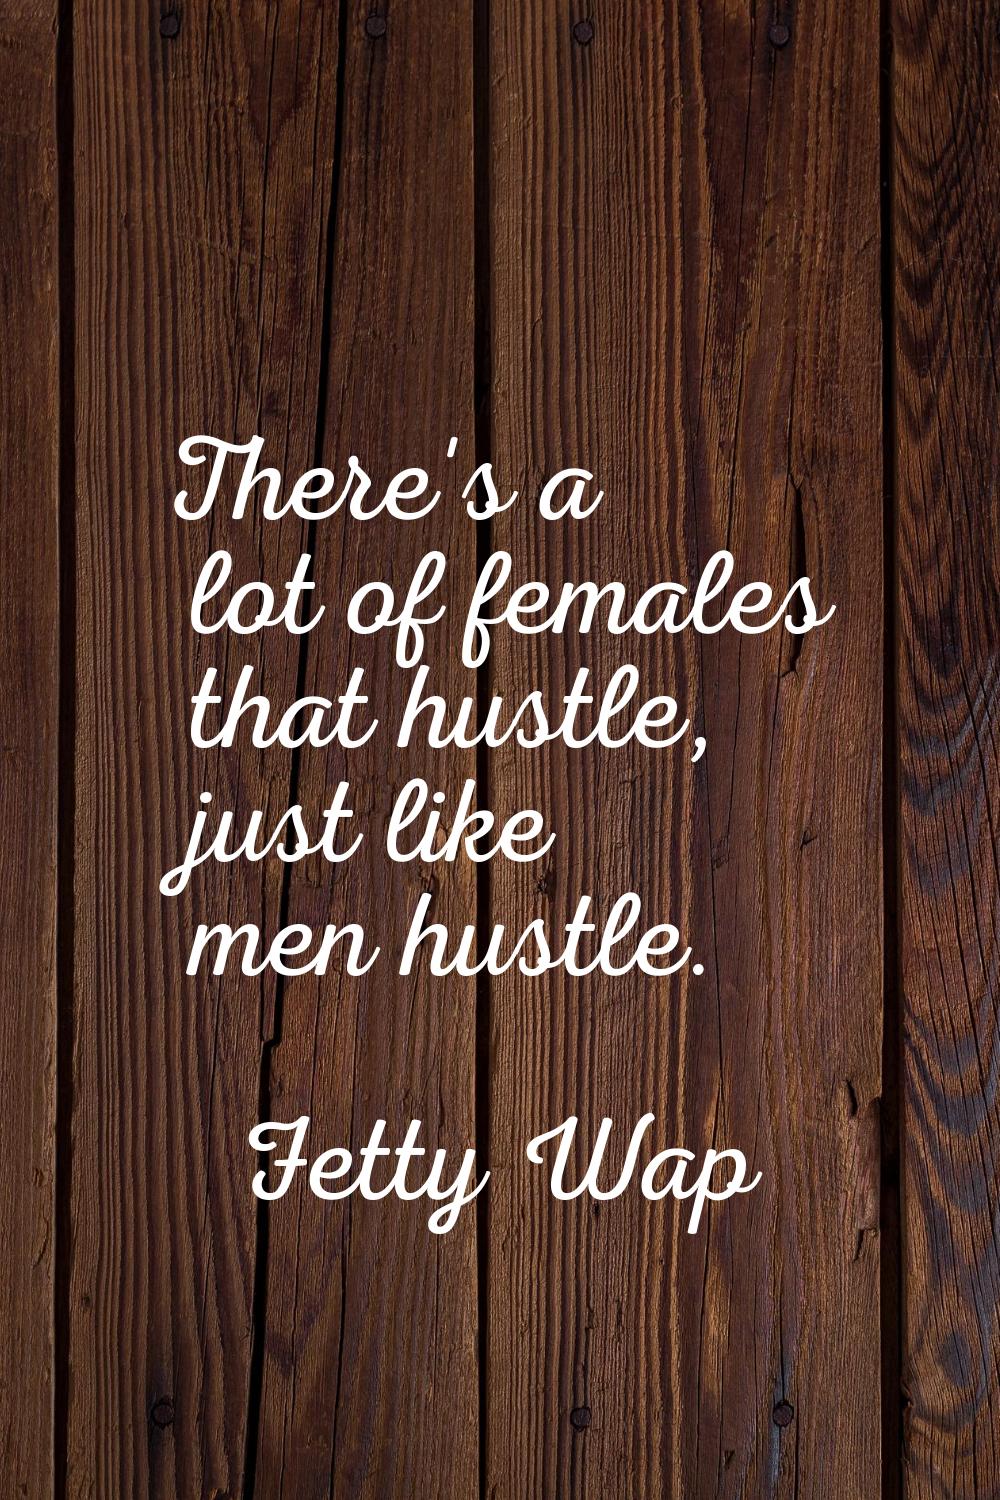 There's a lot of females that hustle, just like men hustle.